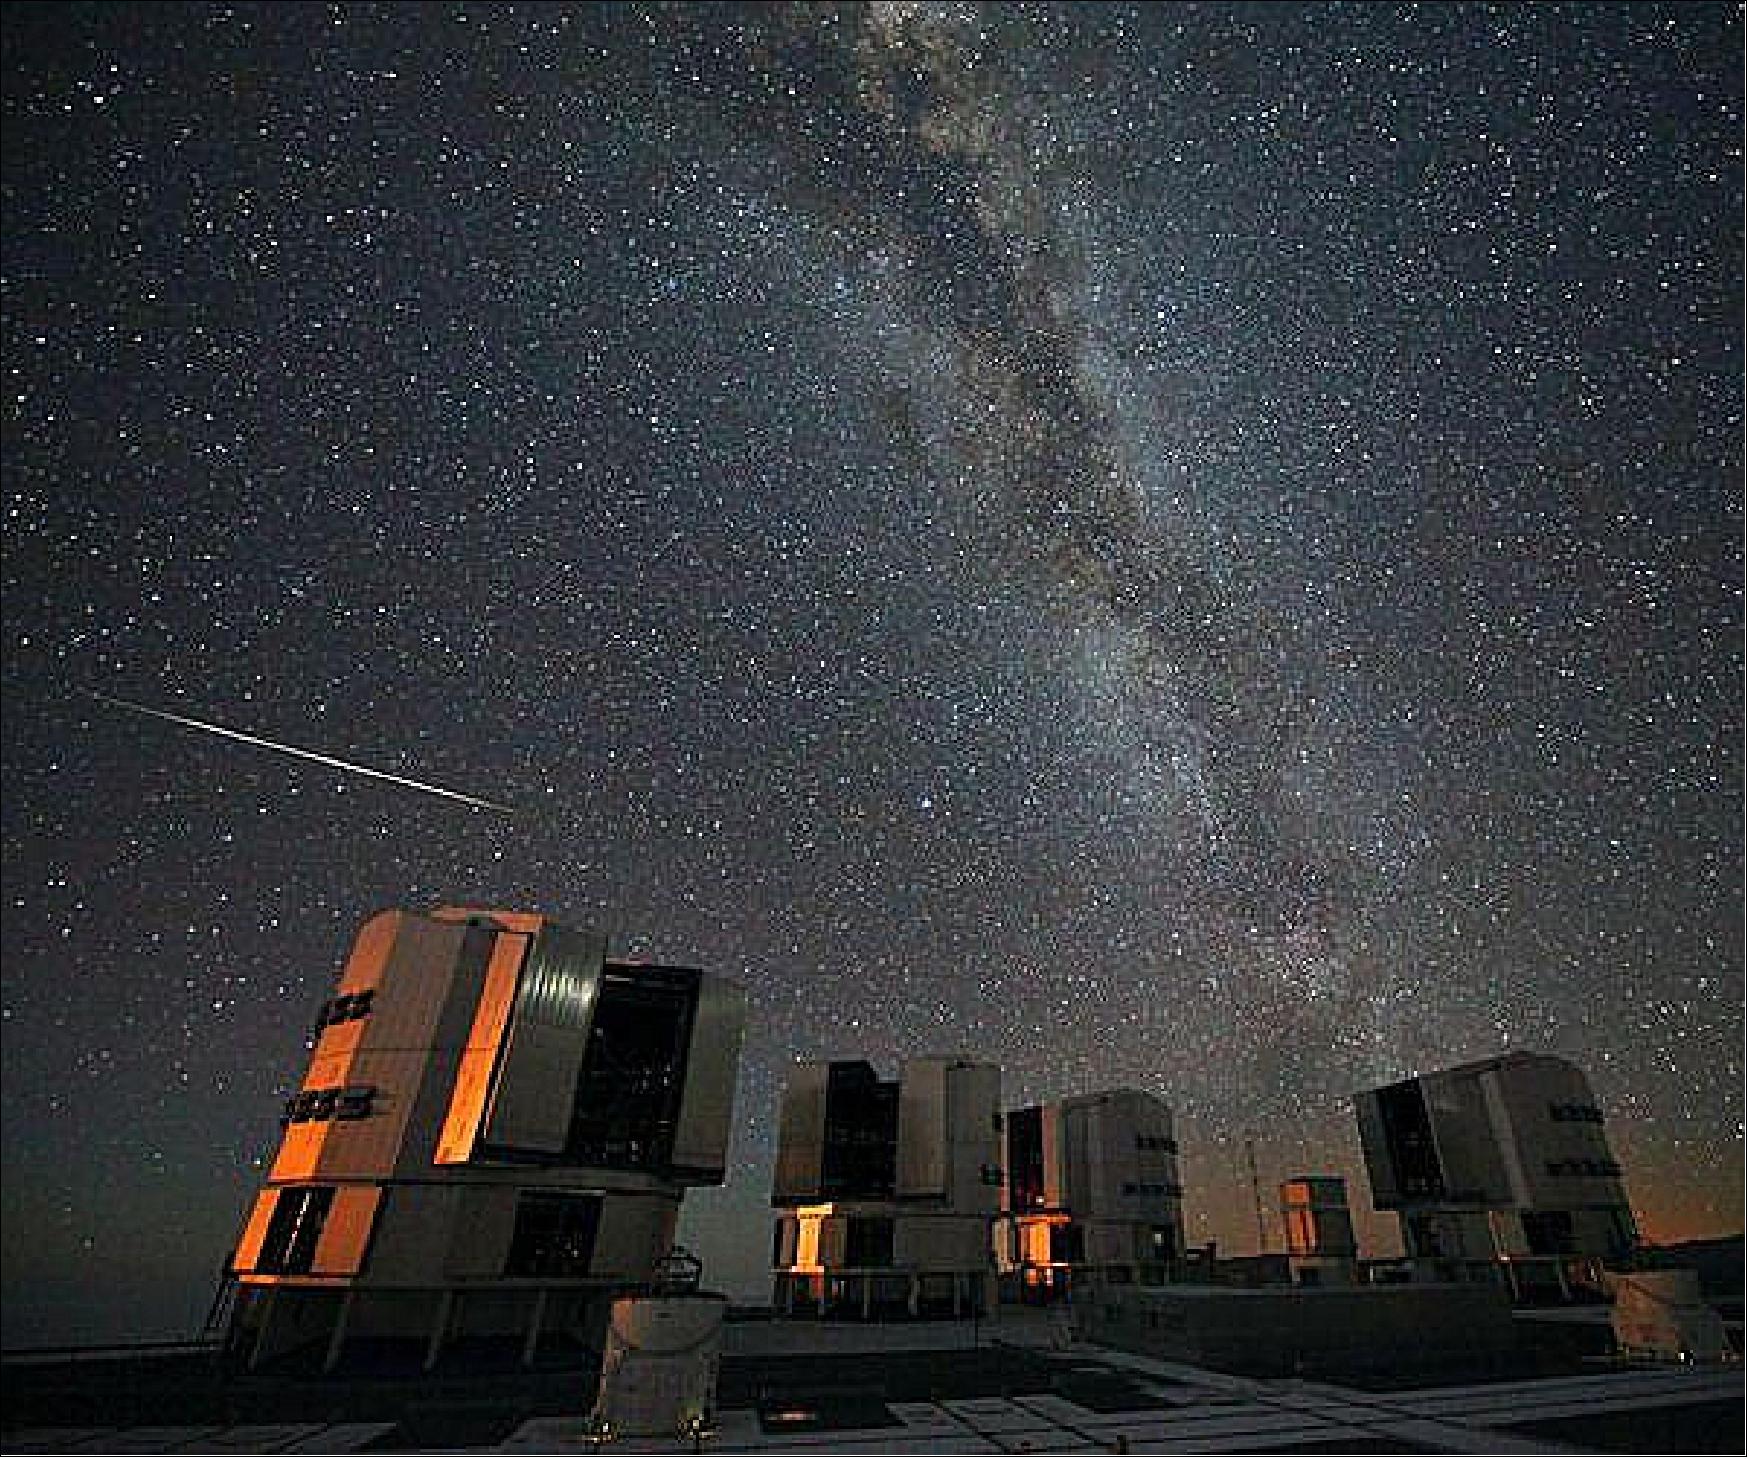 Figure 76: Moonshine photo of the VLT (Very Large Telescope) observatory on the Cerro Paranal mountain in the Atacama Desert of northern Chile (image credit: ESO)